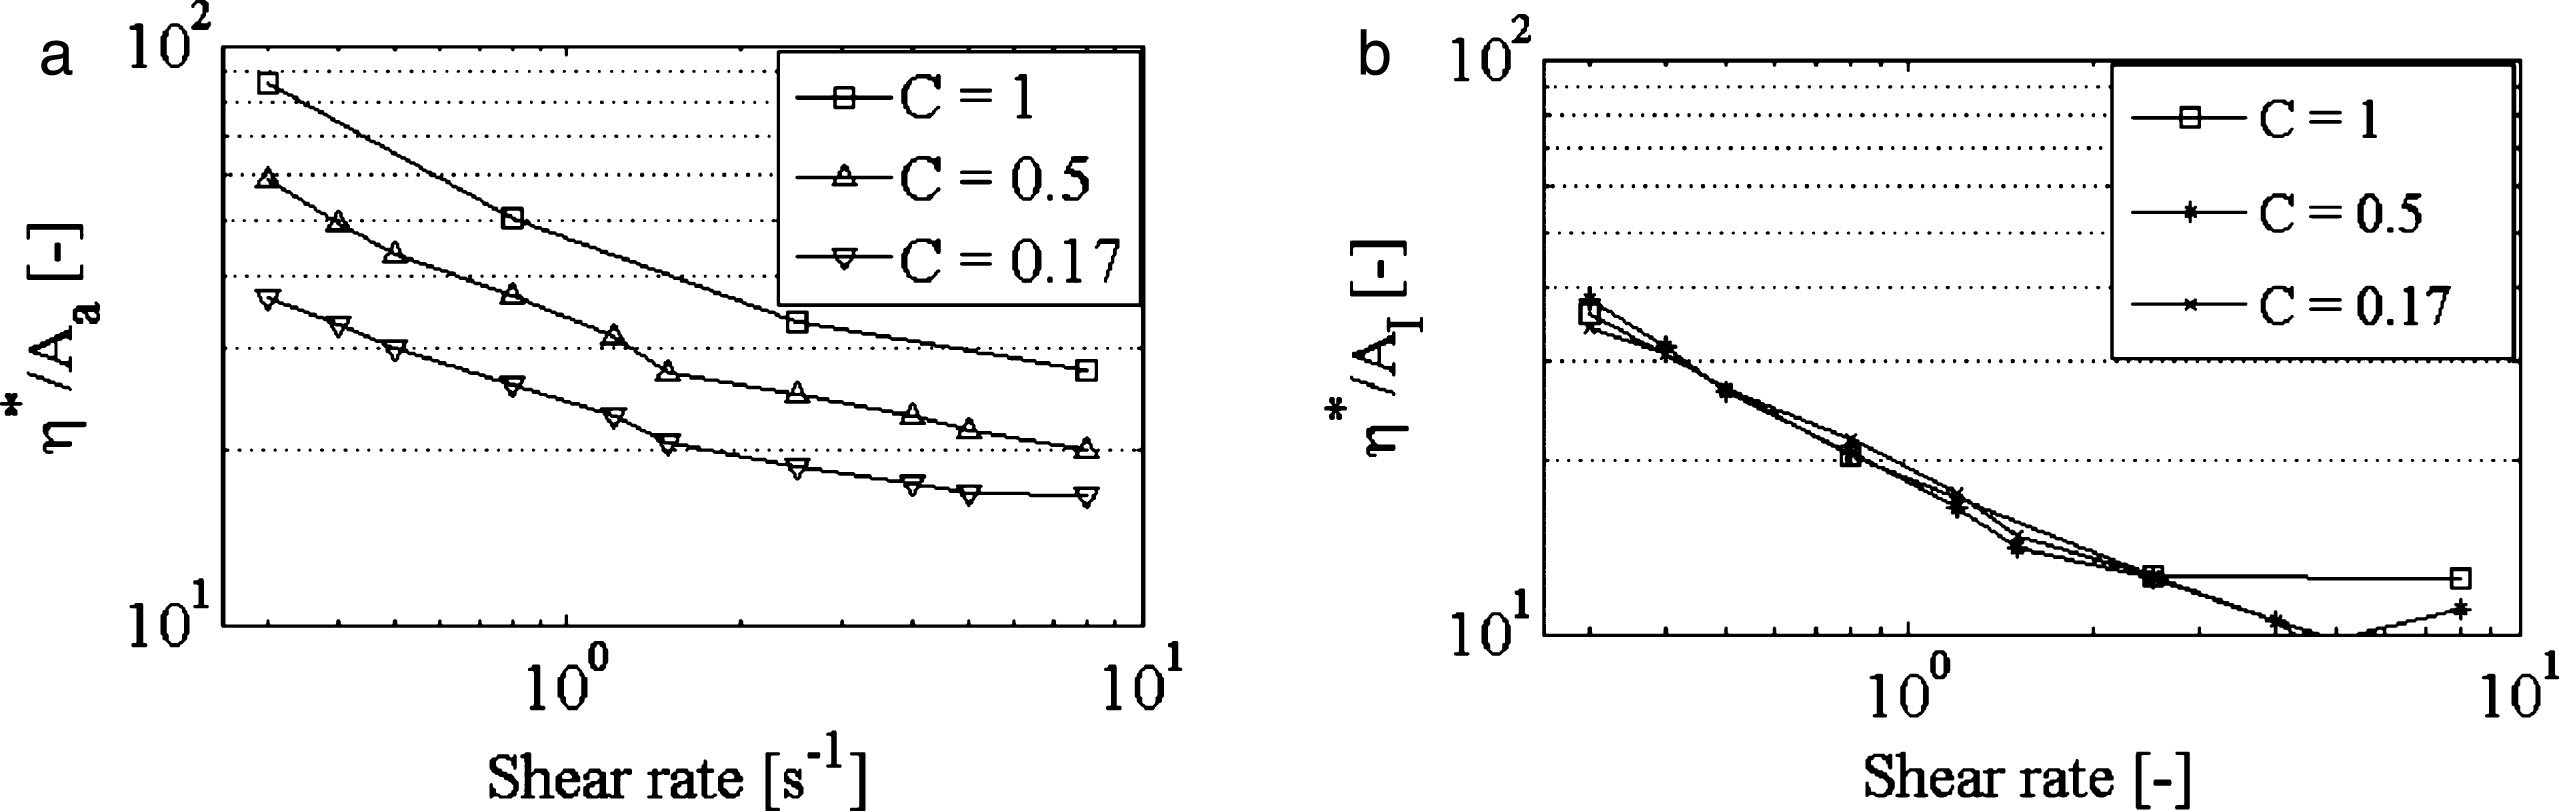 Relative viscosity normalized by Aα (panel a) and by AI (panel b) against shear rate for three flow conditions (data adapted from [22]).